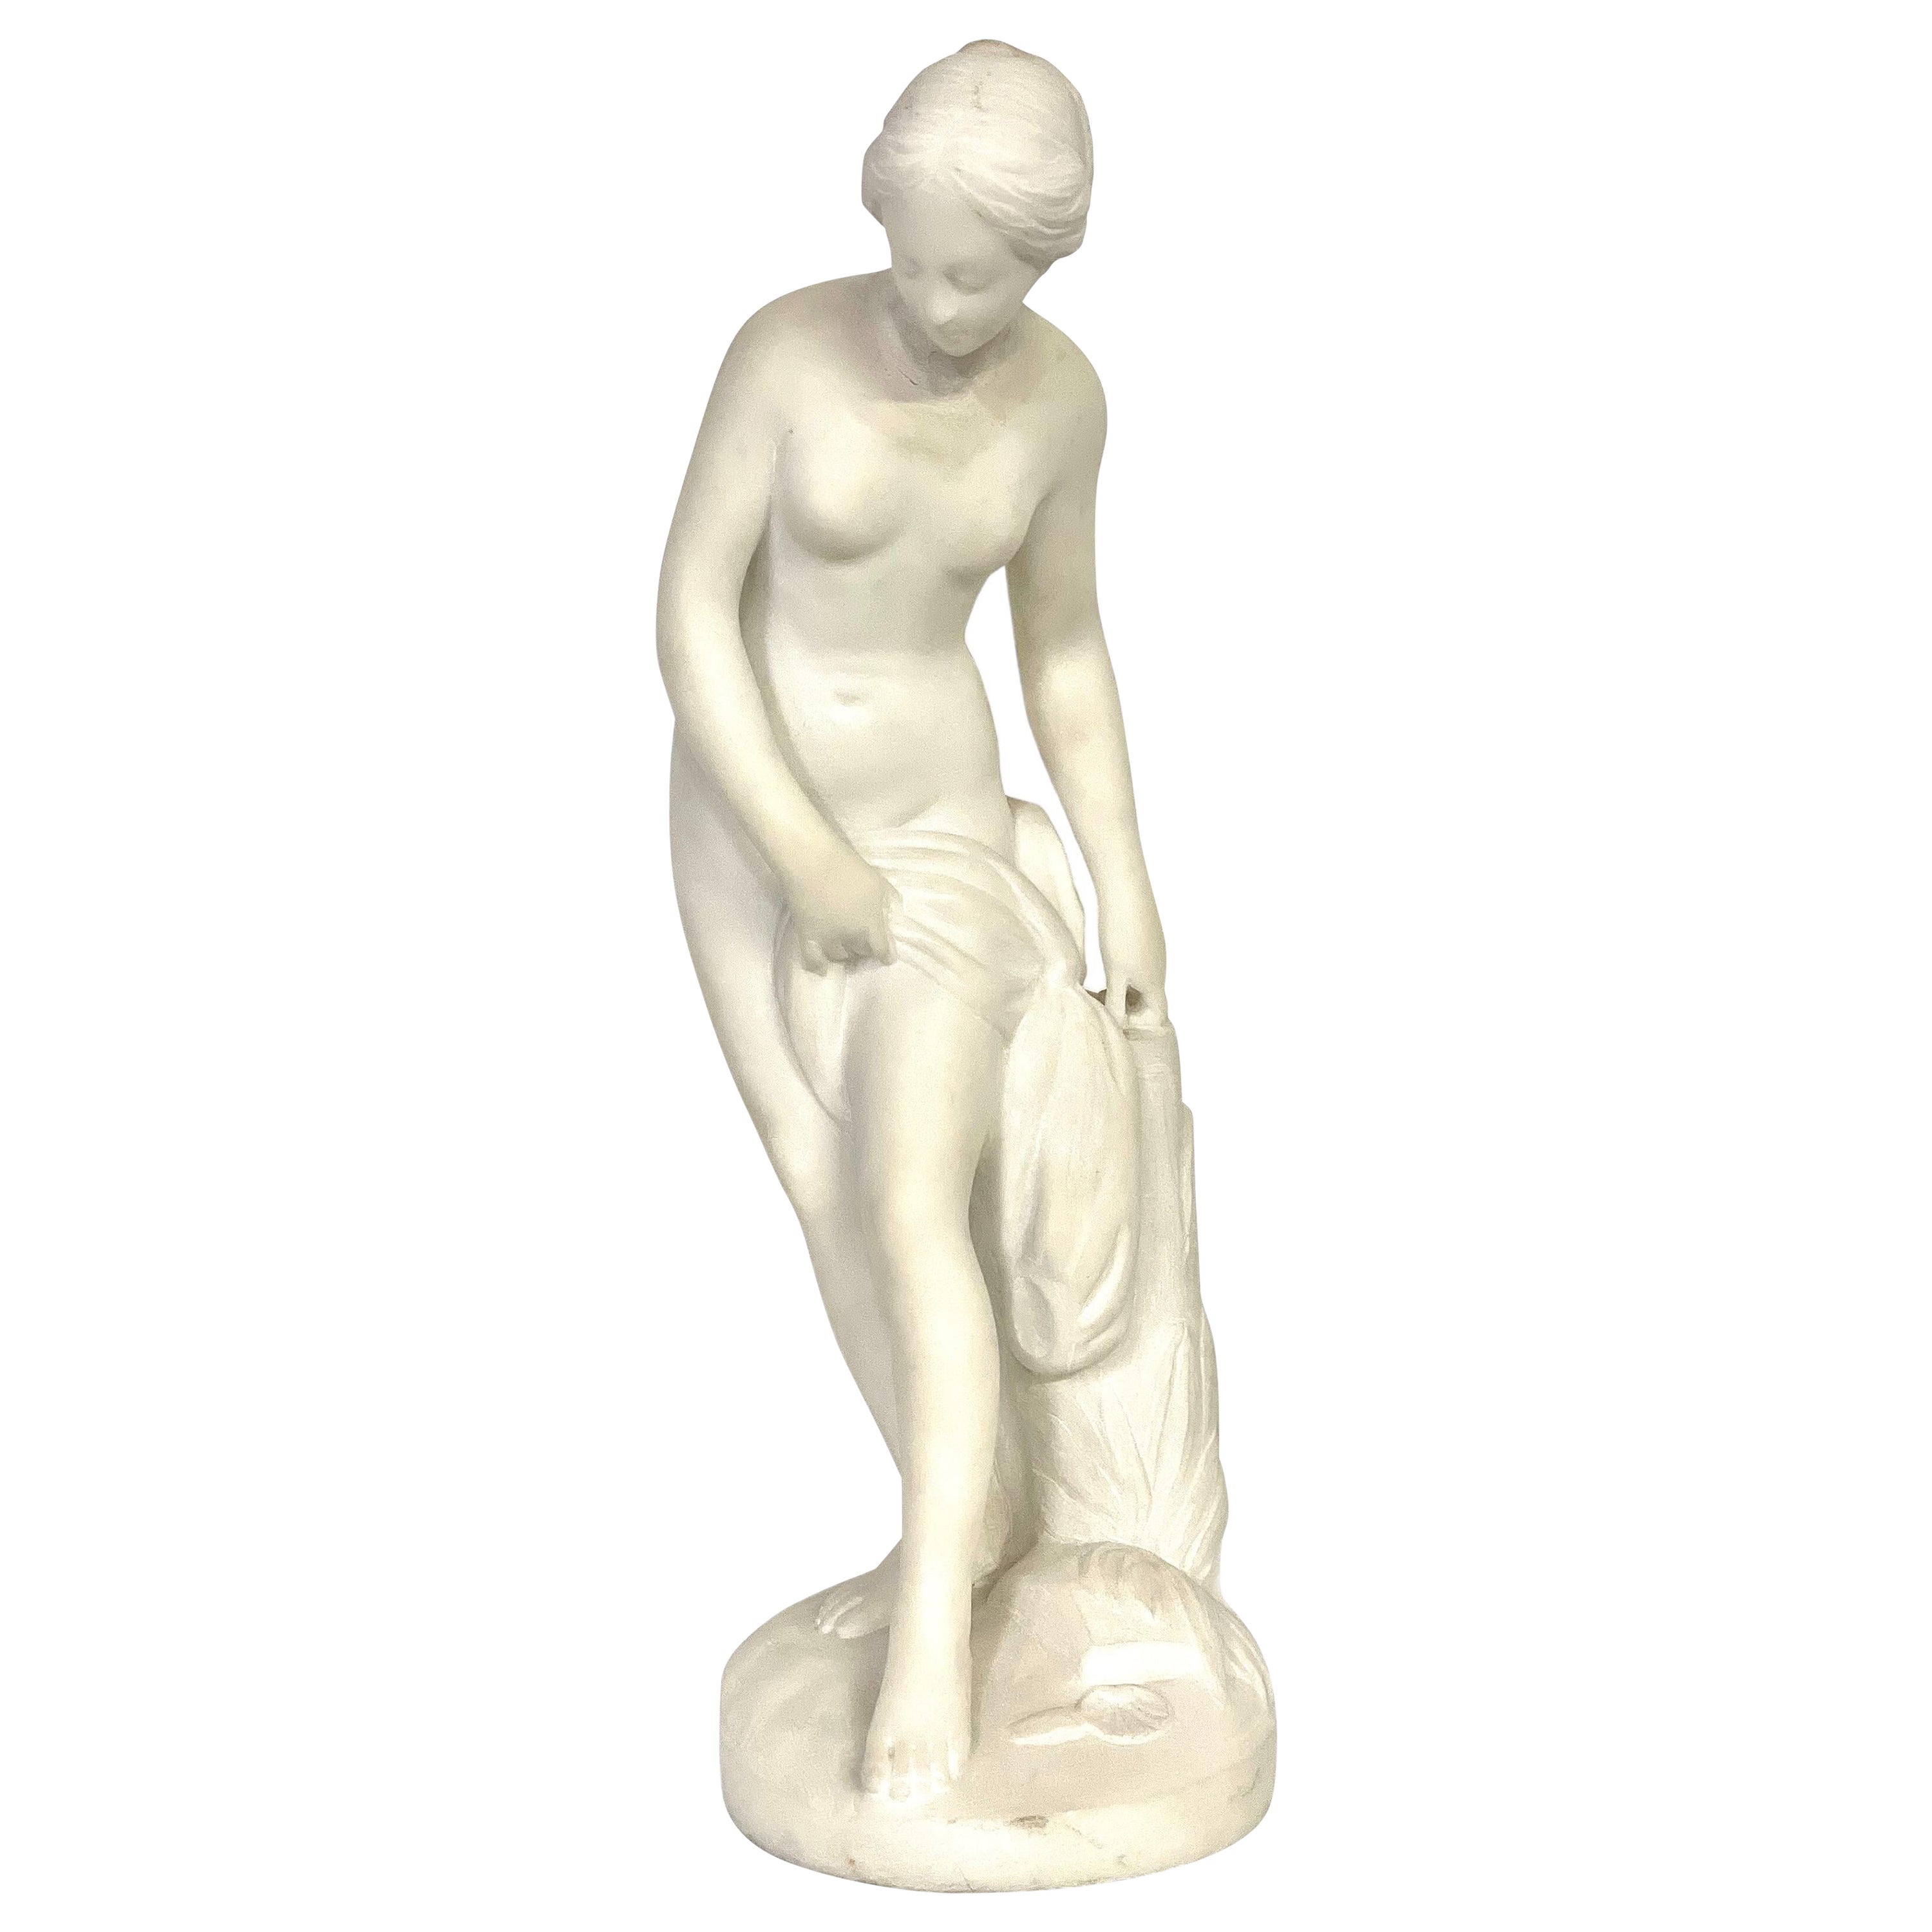 19th Century White Marble Sculpture “La Baigneuse” inspired by Falconet For Sale